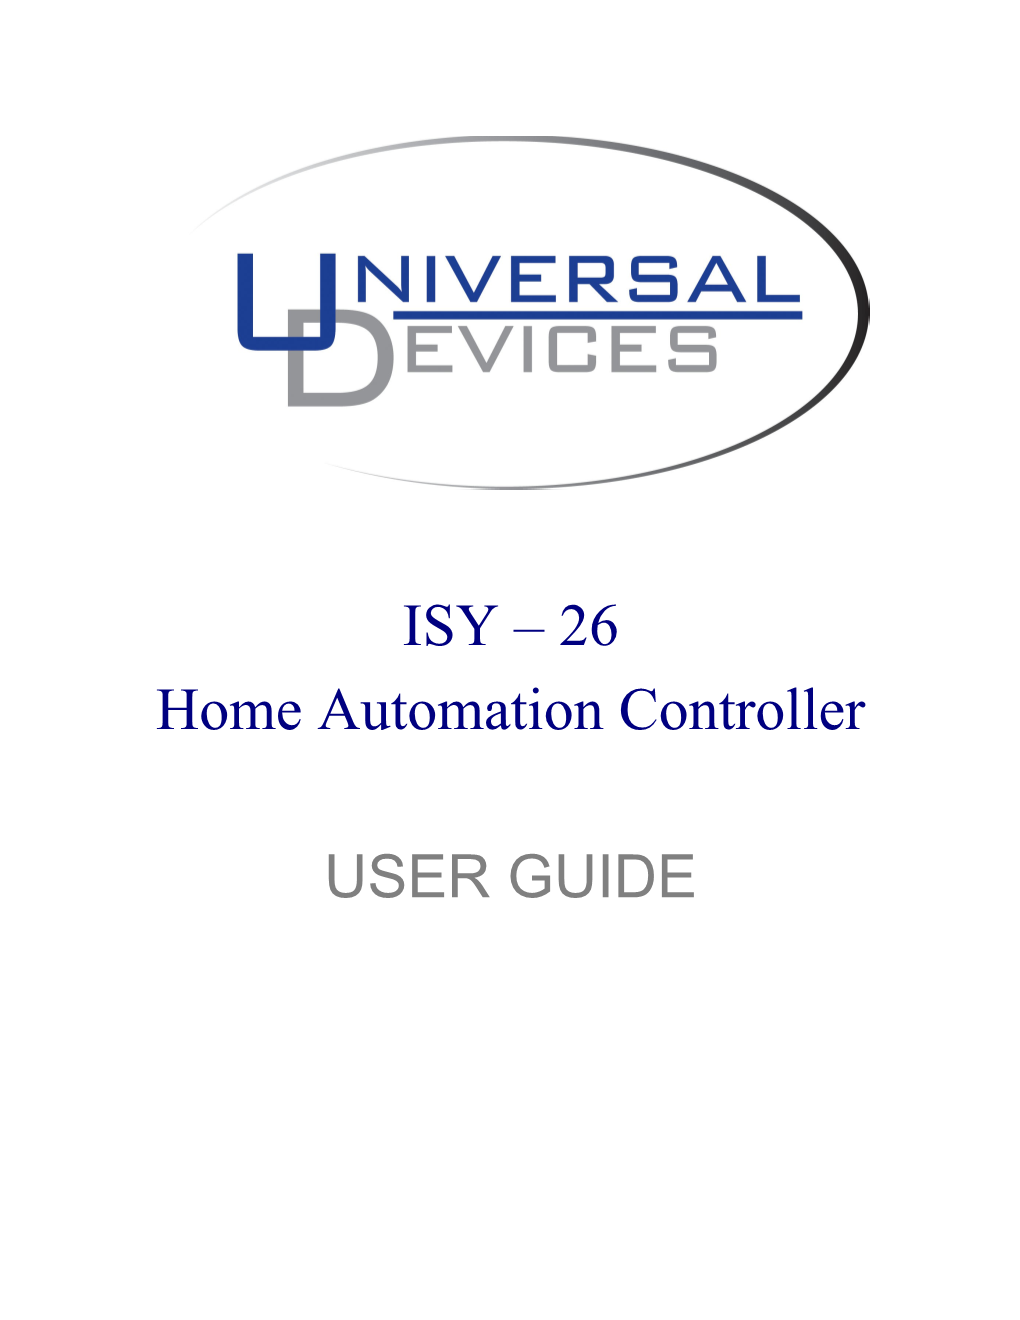 Home Automation Controller